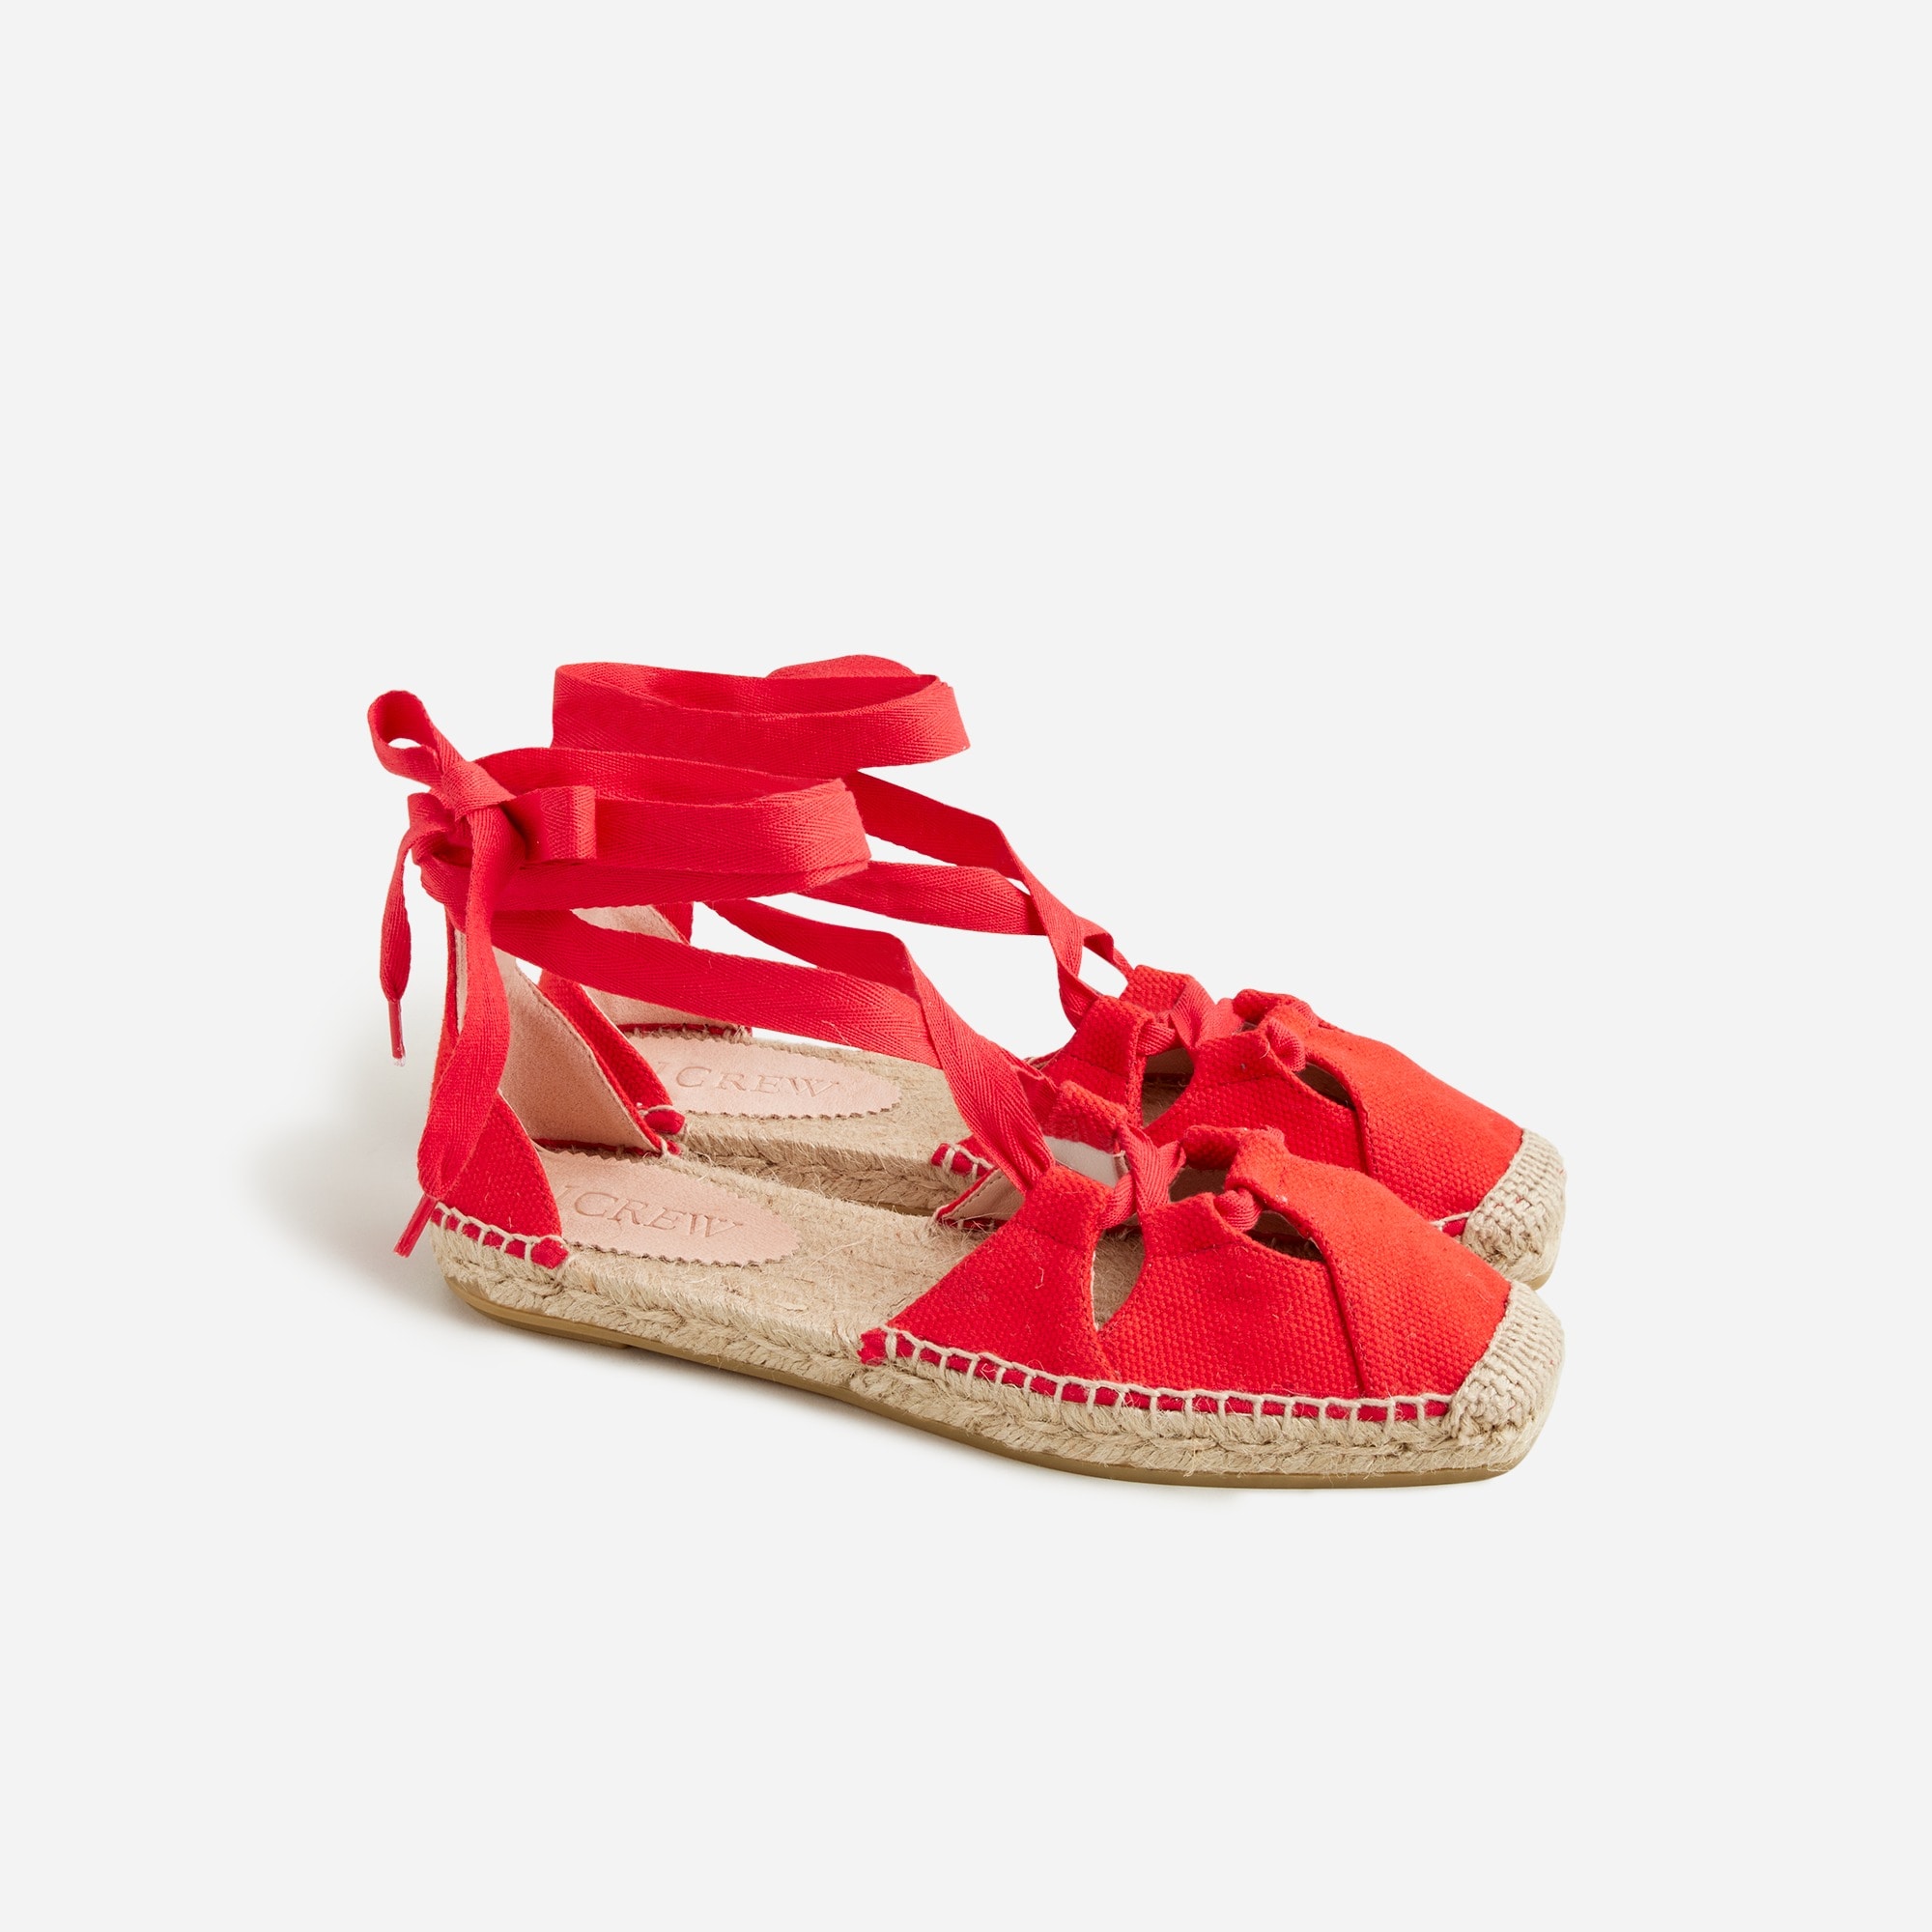  Made-in-Spain cutout lace-up espadrilles